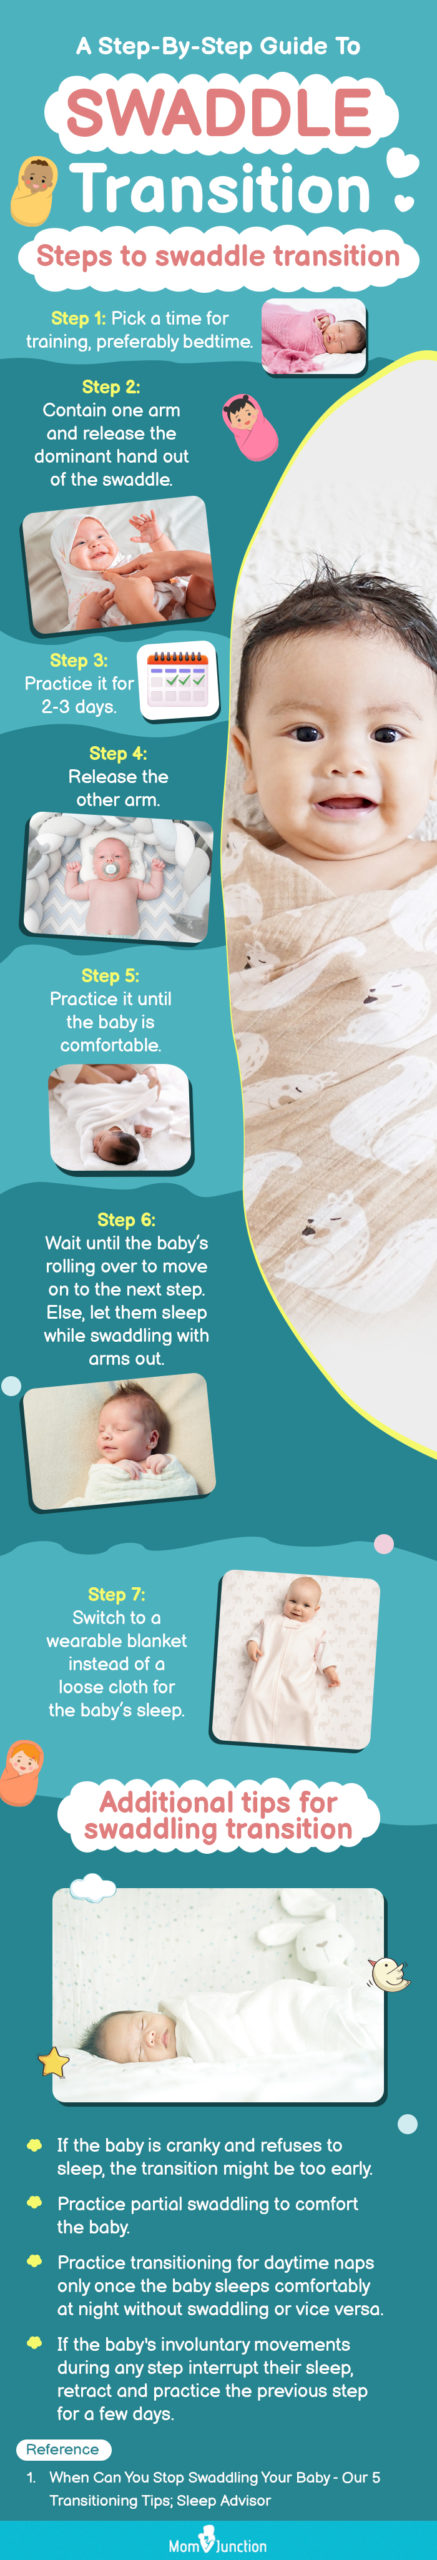 step by step guide to swaddle transition [infographic]